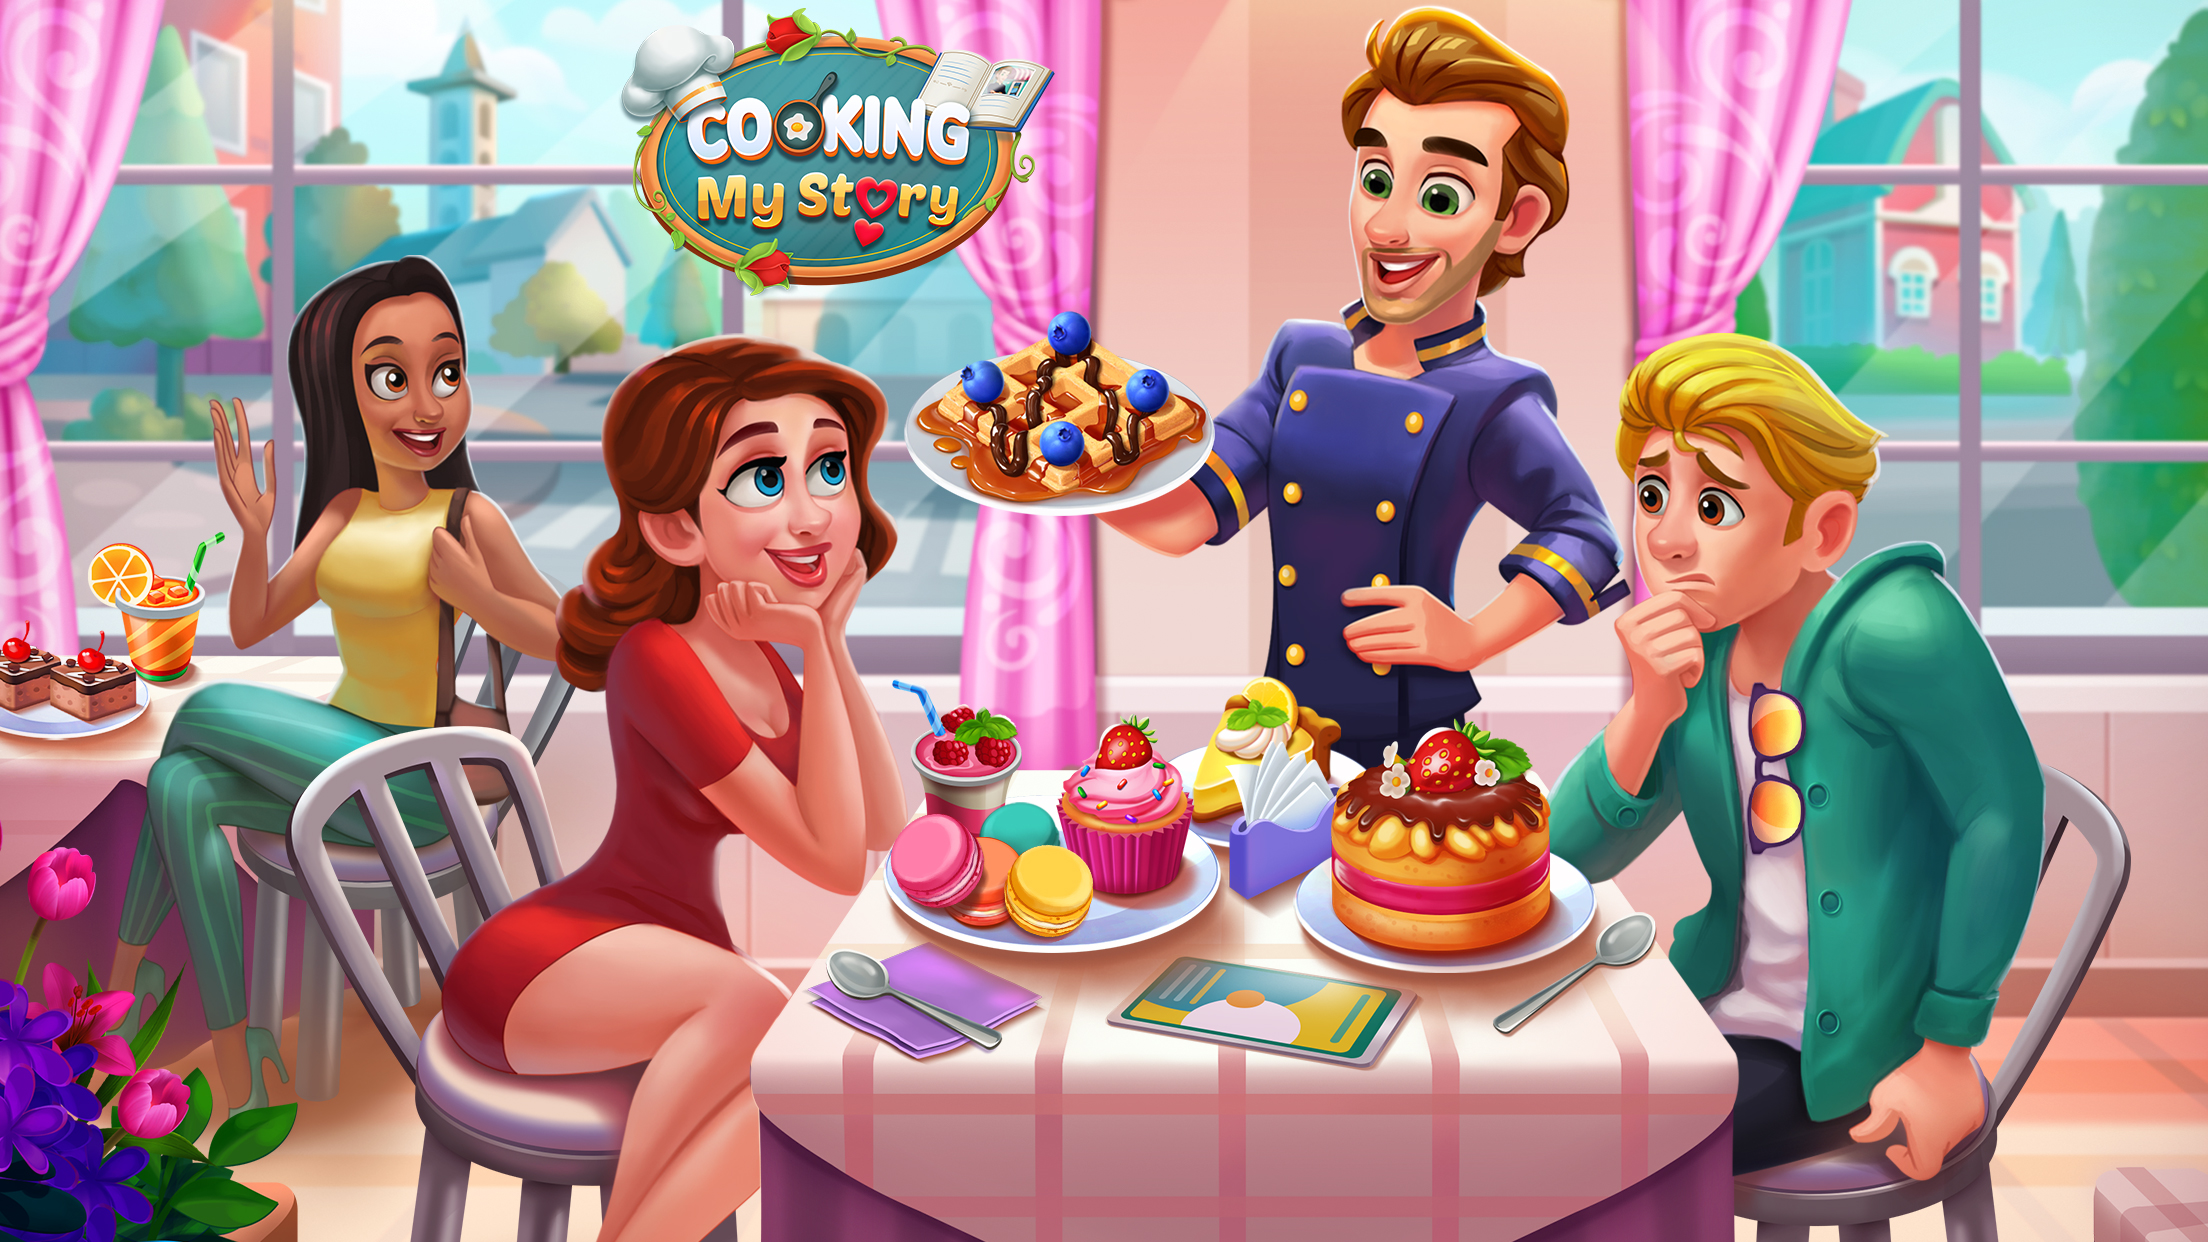 Cook stories. My Cooking игра. Cooking stories игра. Еда в играх. Игра Cooking Diary на ПК.